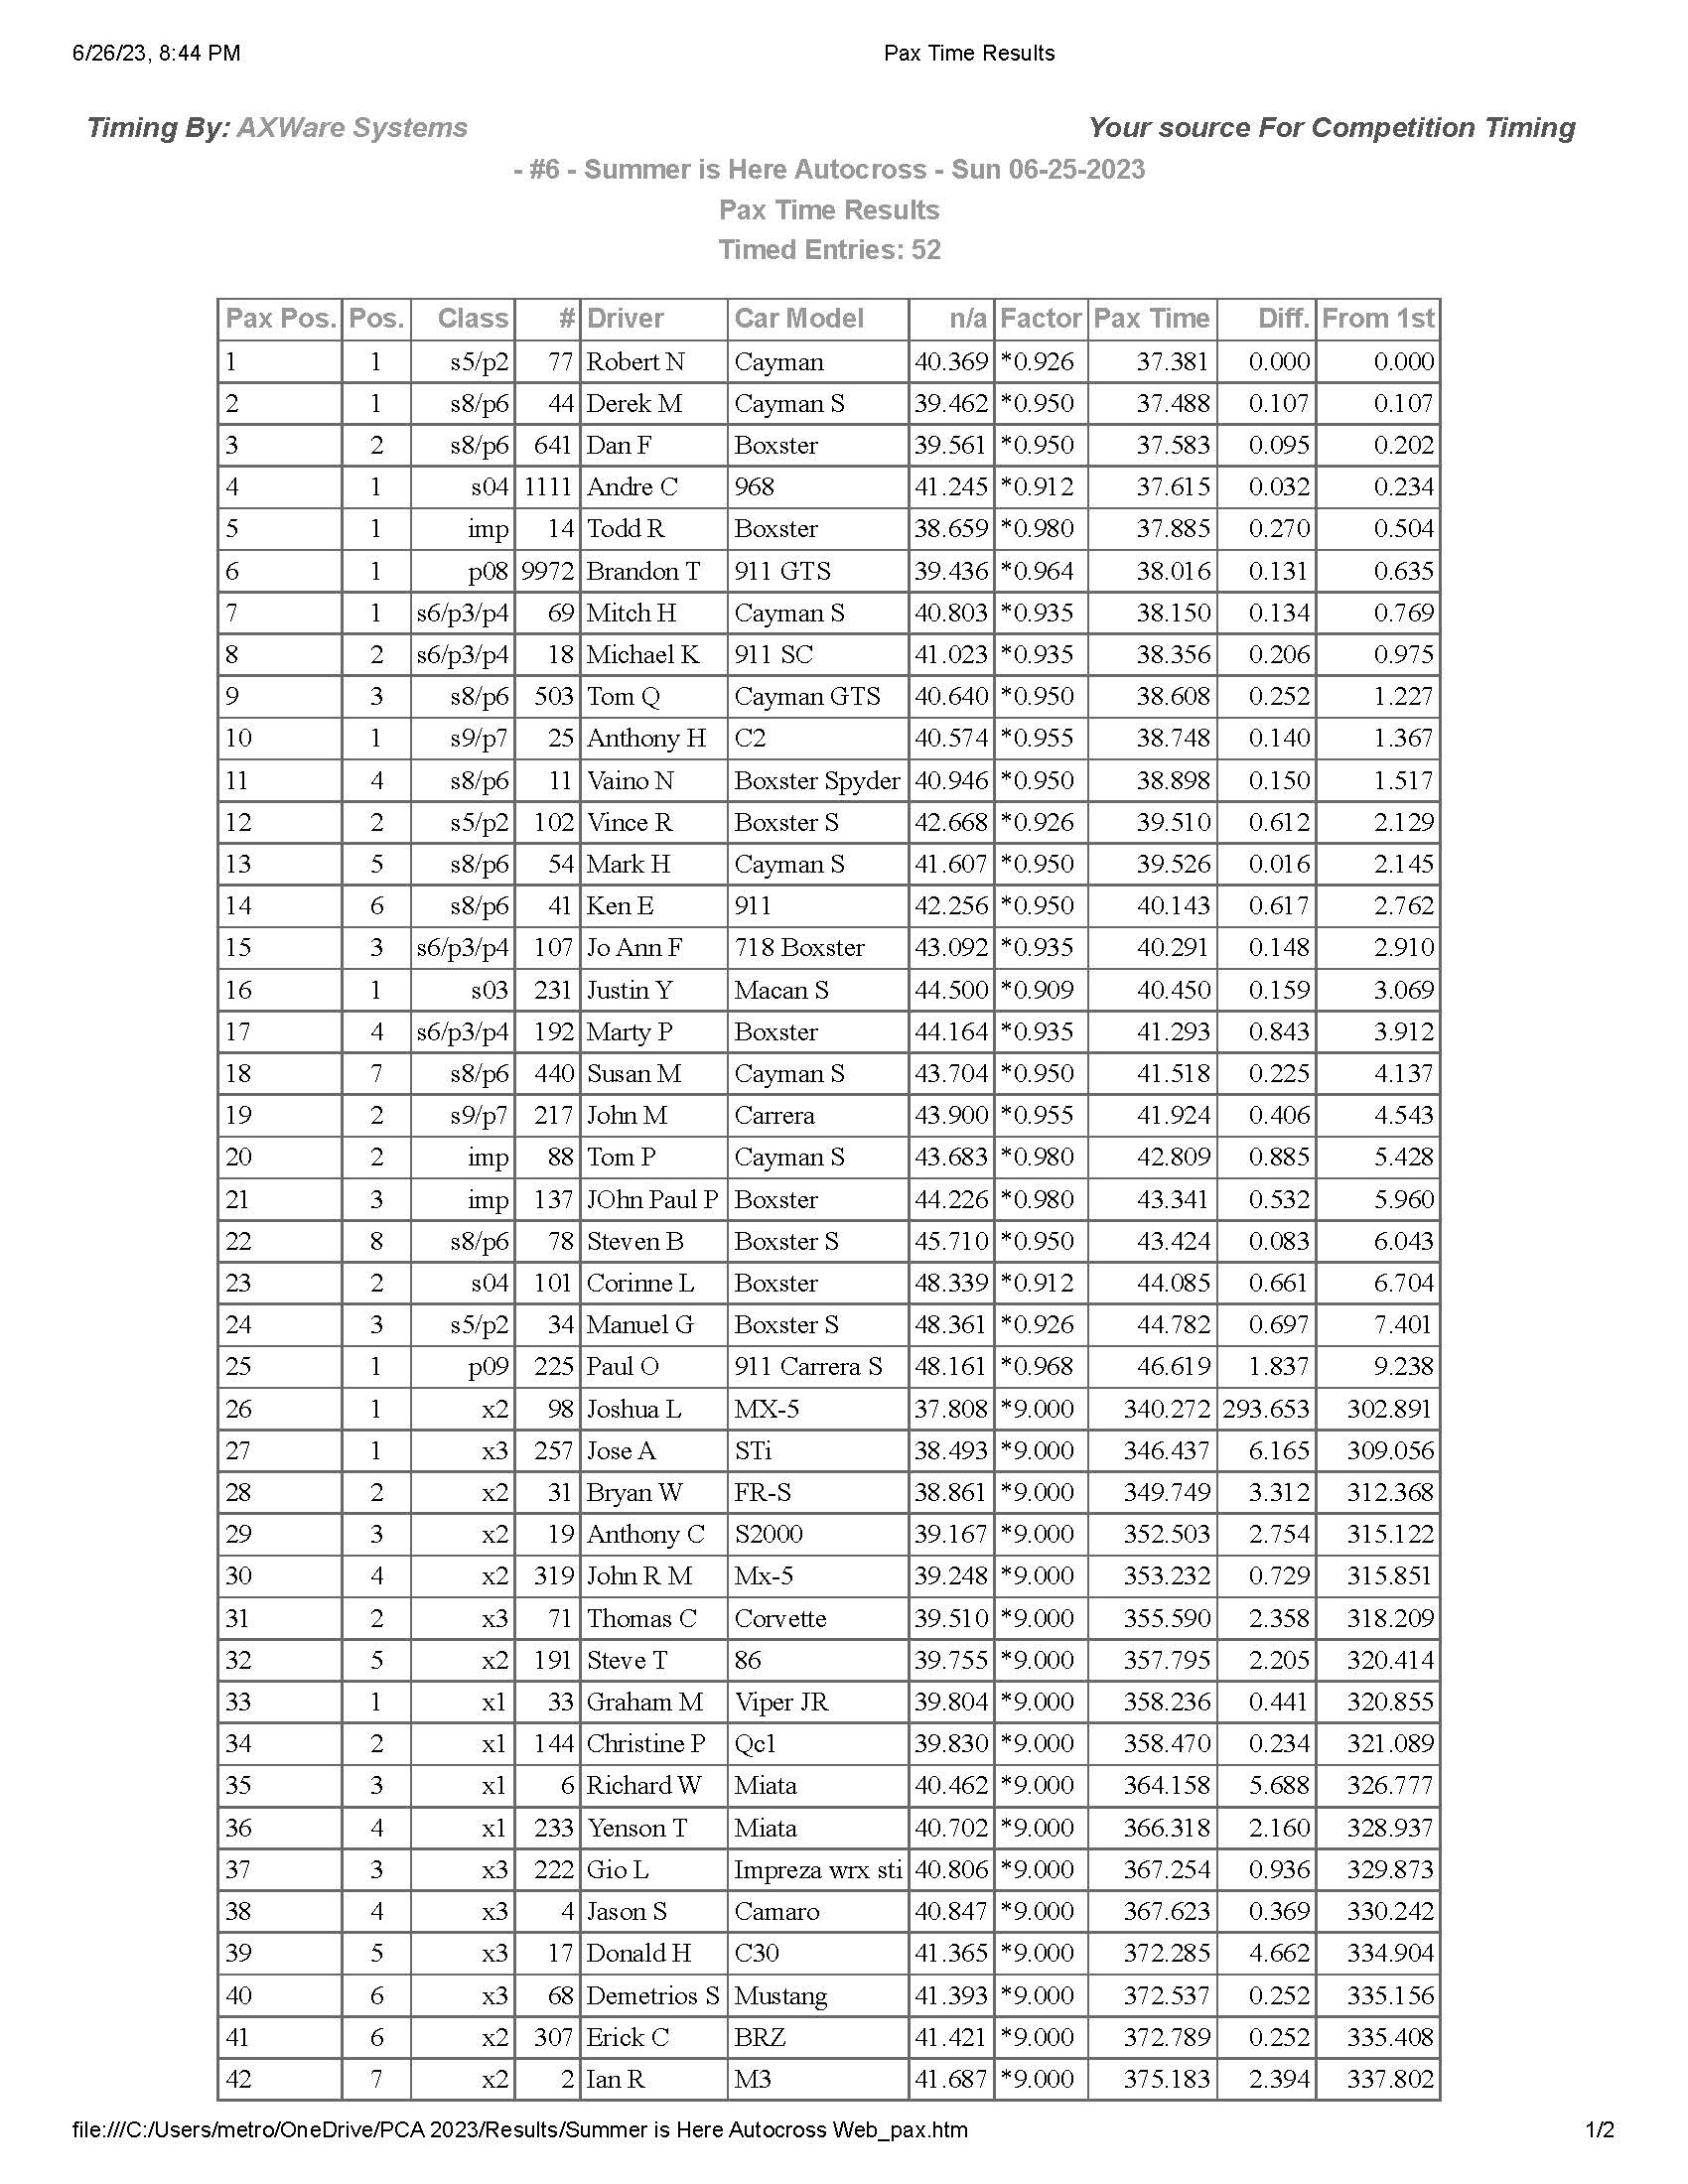 Summer is Here Autocross Pax Time Results Page 1